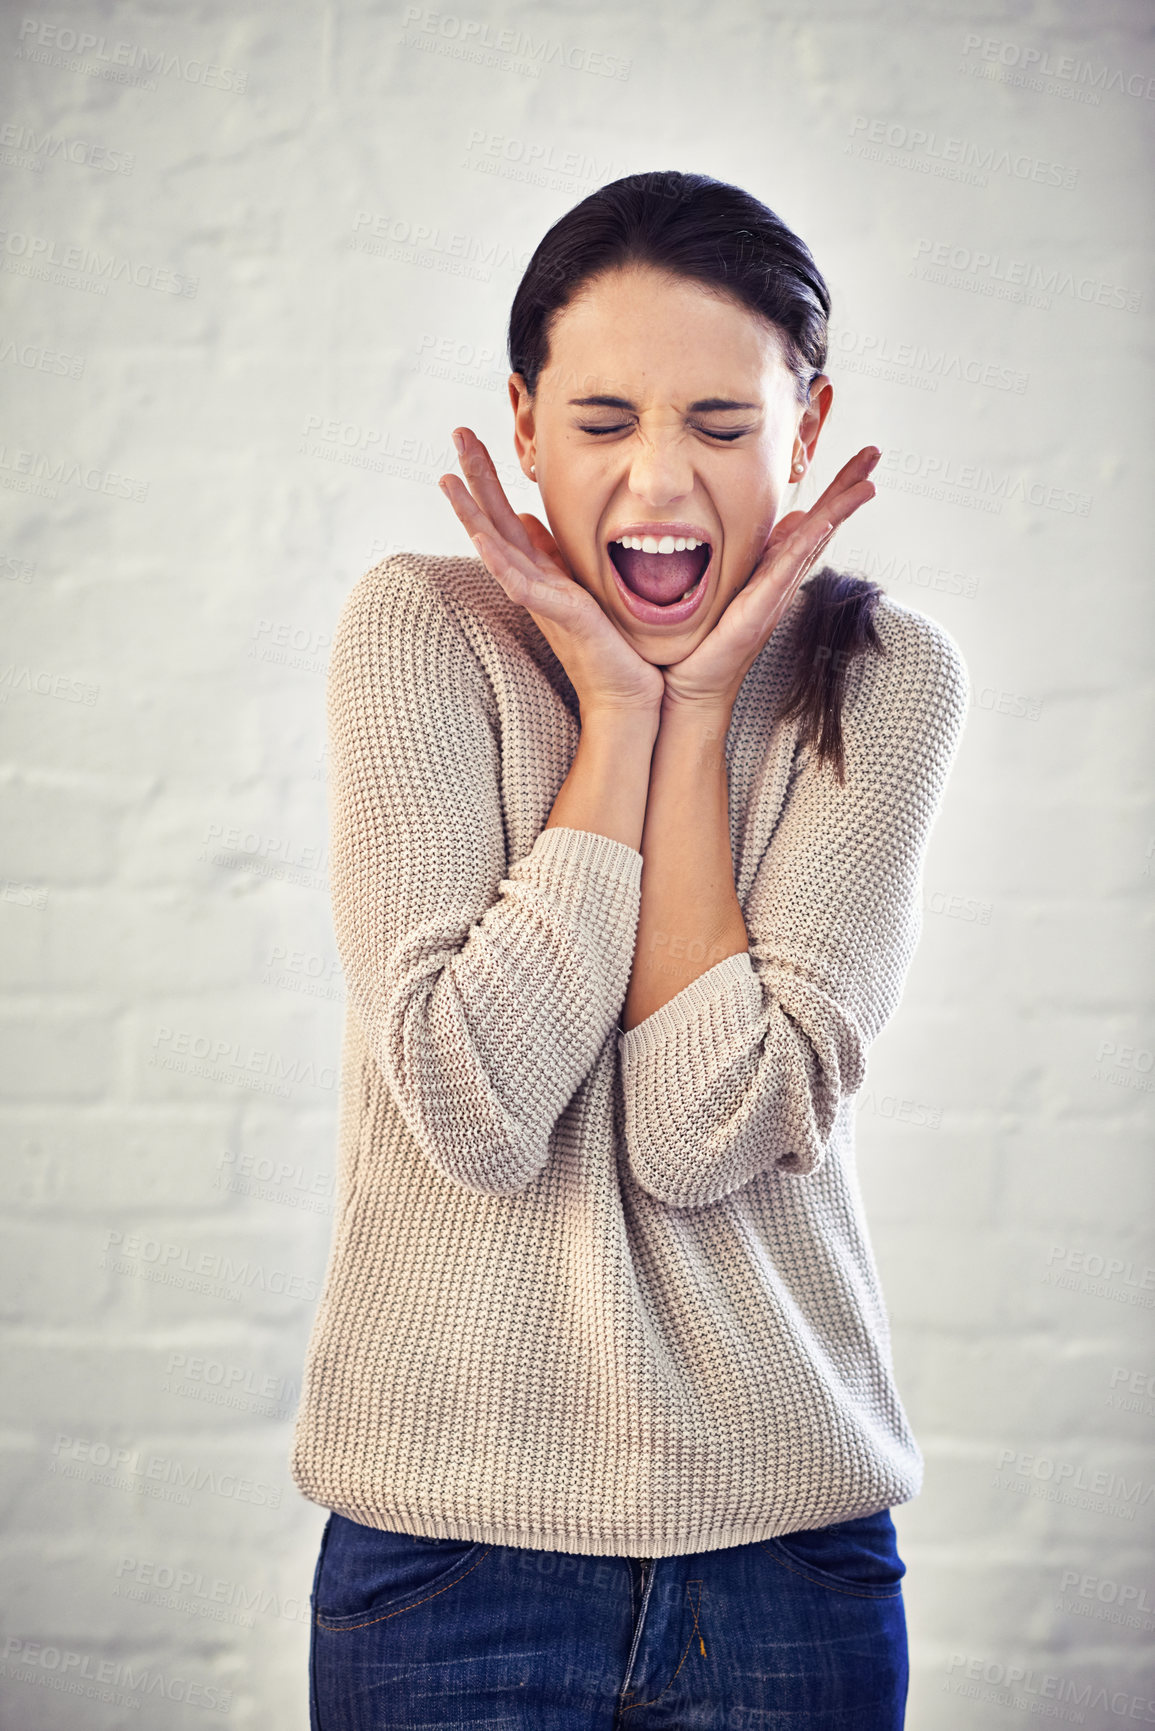 Buy stock photo Shot of a young woman looking shocked and shouting